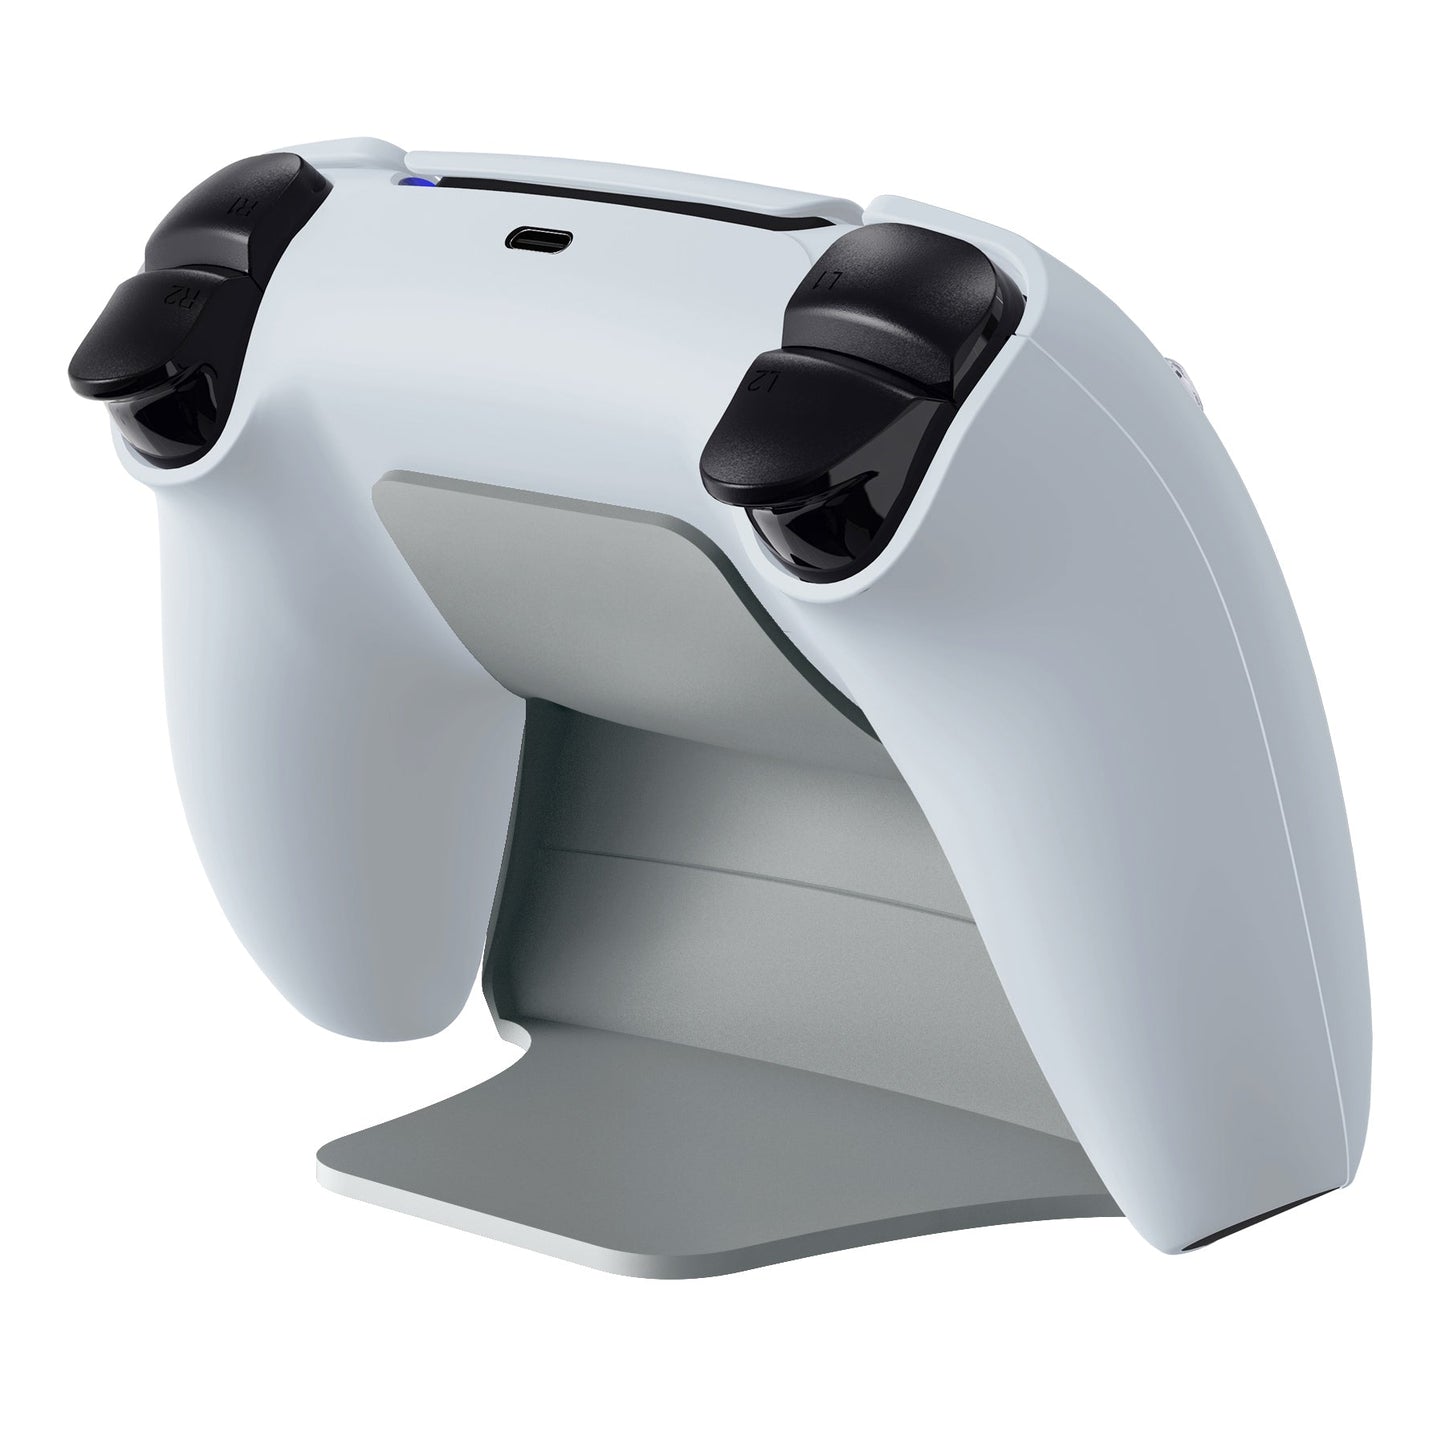 PlayVital Gray Controller Display Stand for PS5, Gamepad Accessories Desk Holder for PS5 Controller with Rubber Pads - PFPJ015 PlayVital